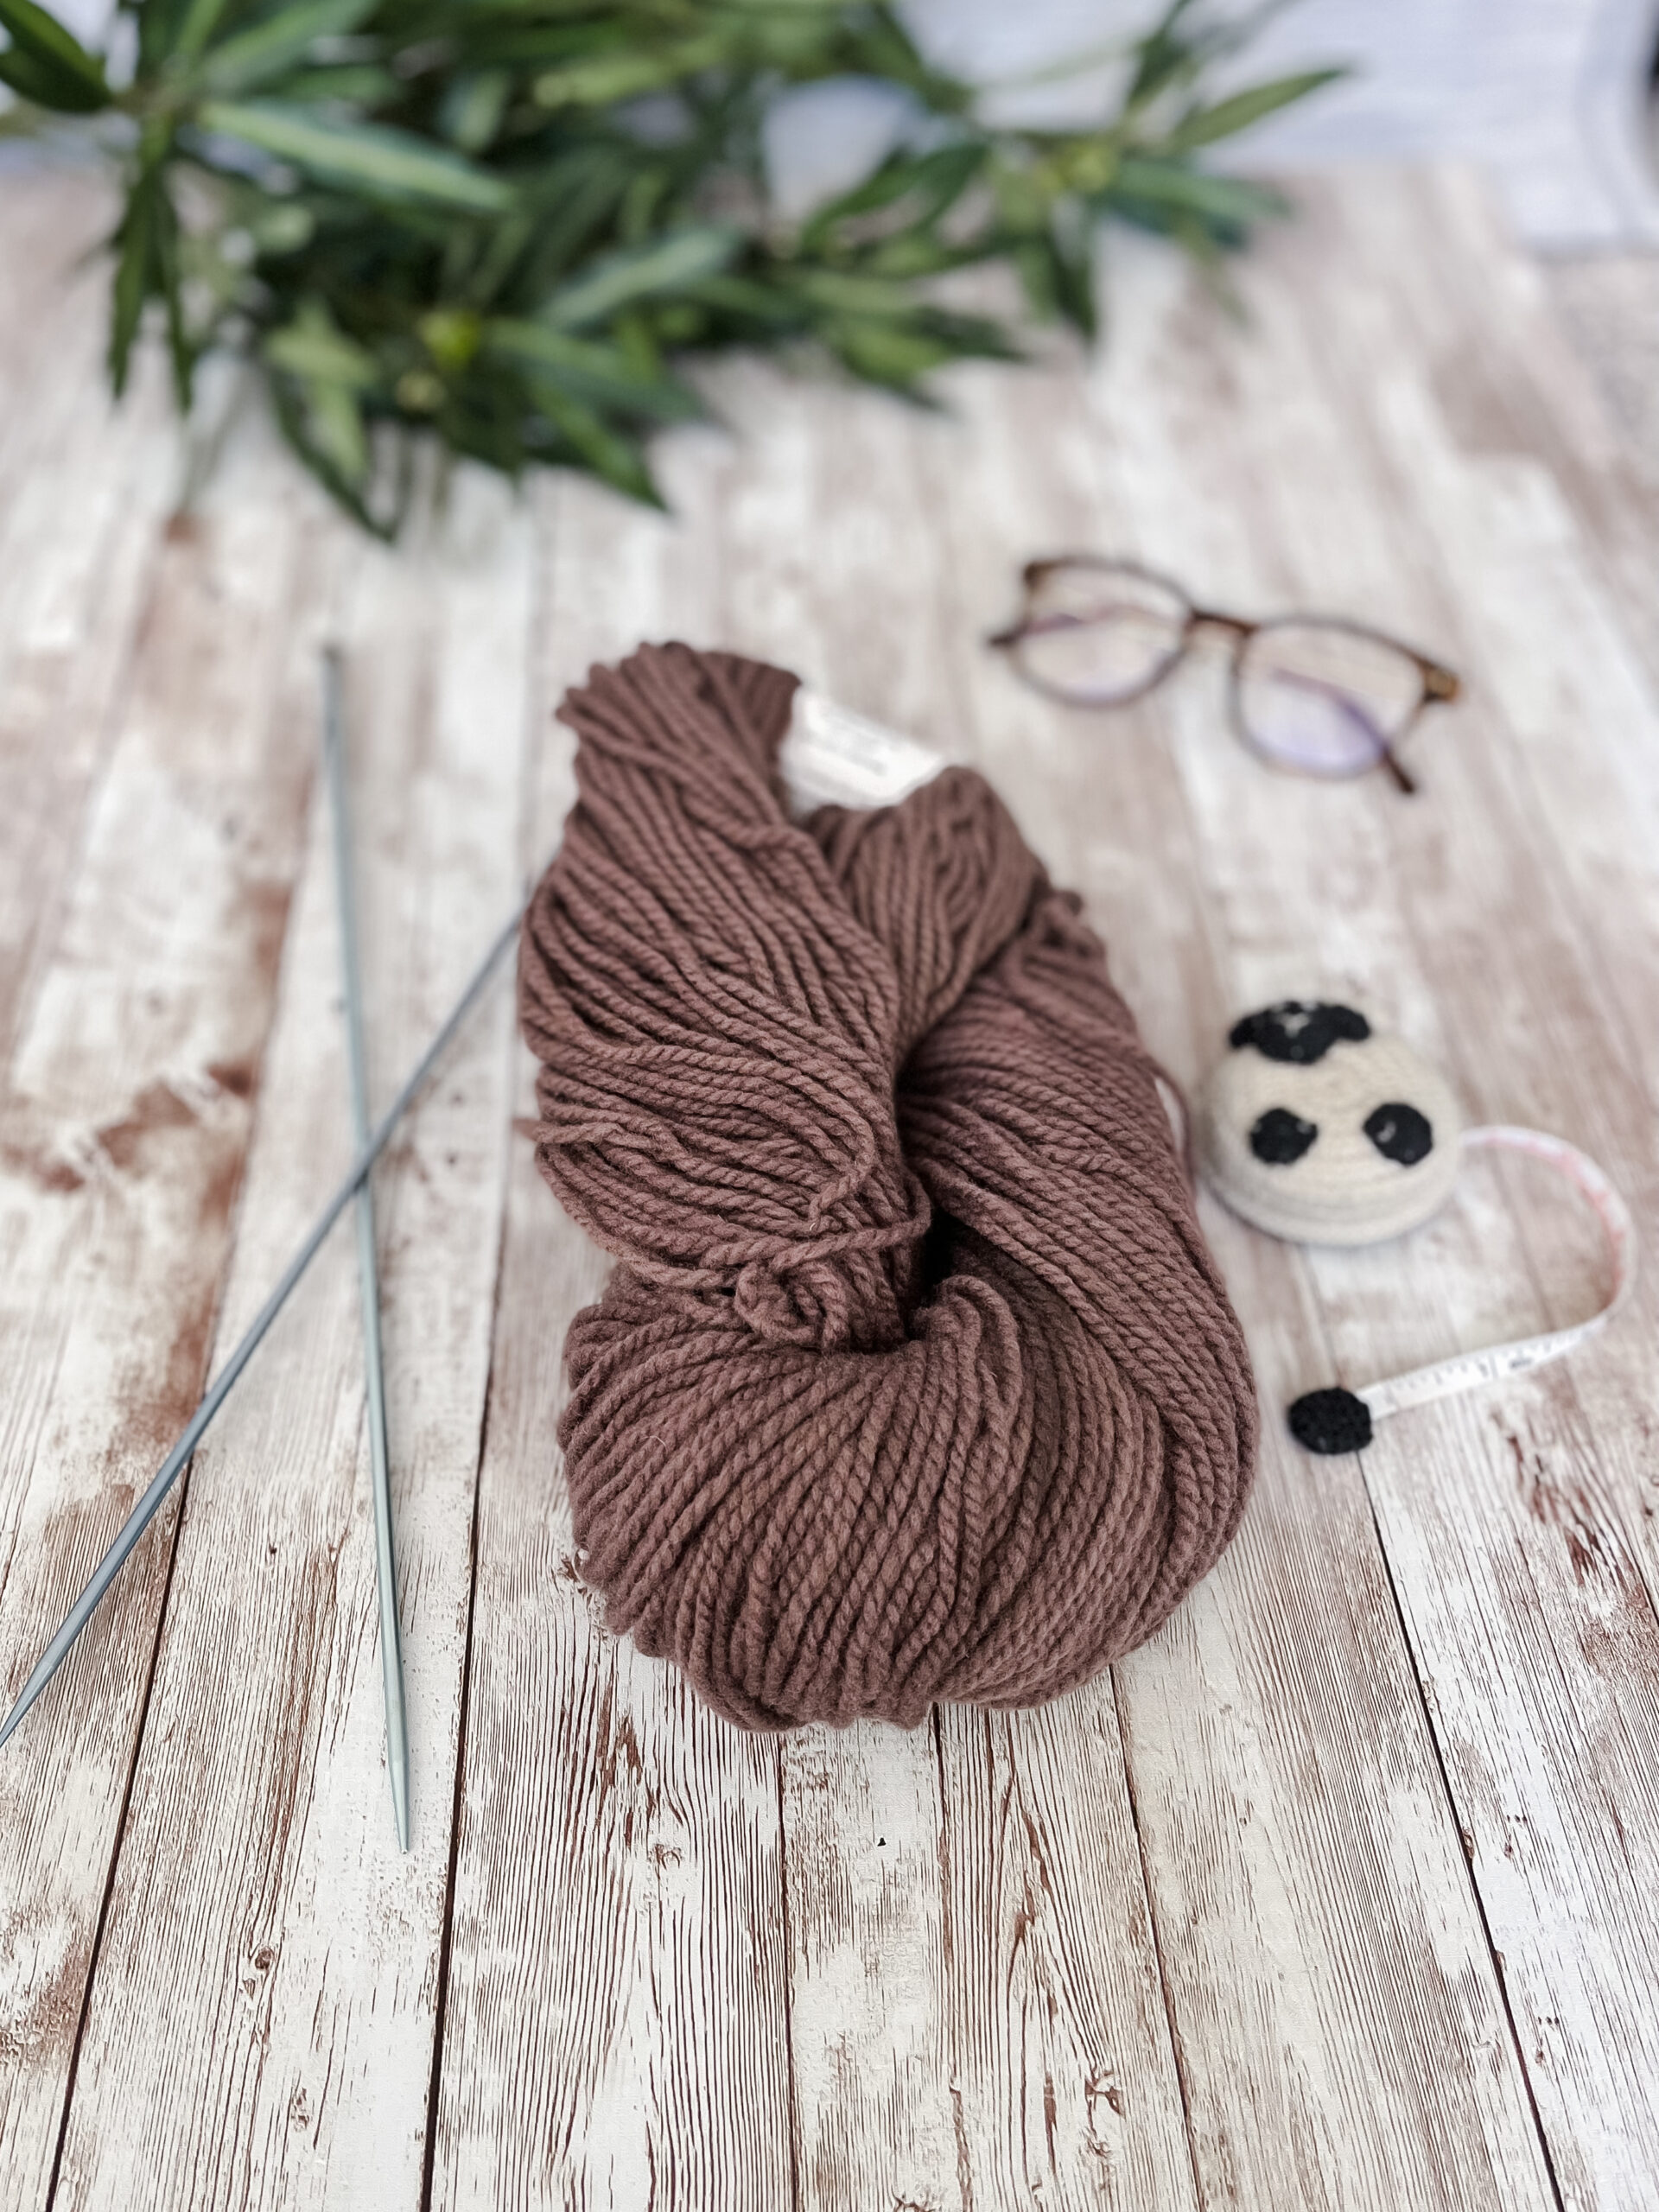 A hank of brown, Virginia farmed fine merino yarn rests on a wood plank, with knitting needles, a sheep measuring tape, a pair of reading glasses, and some greenery around it